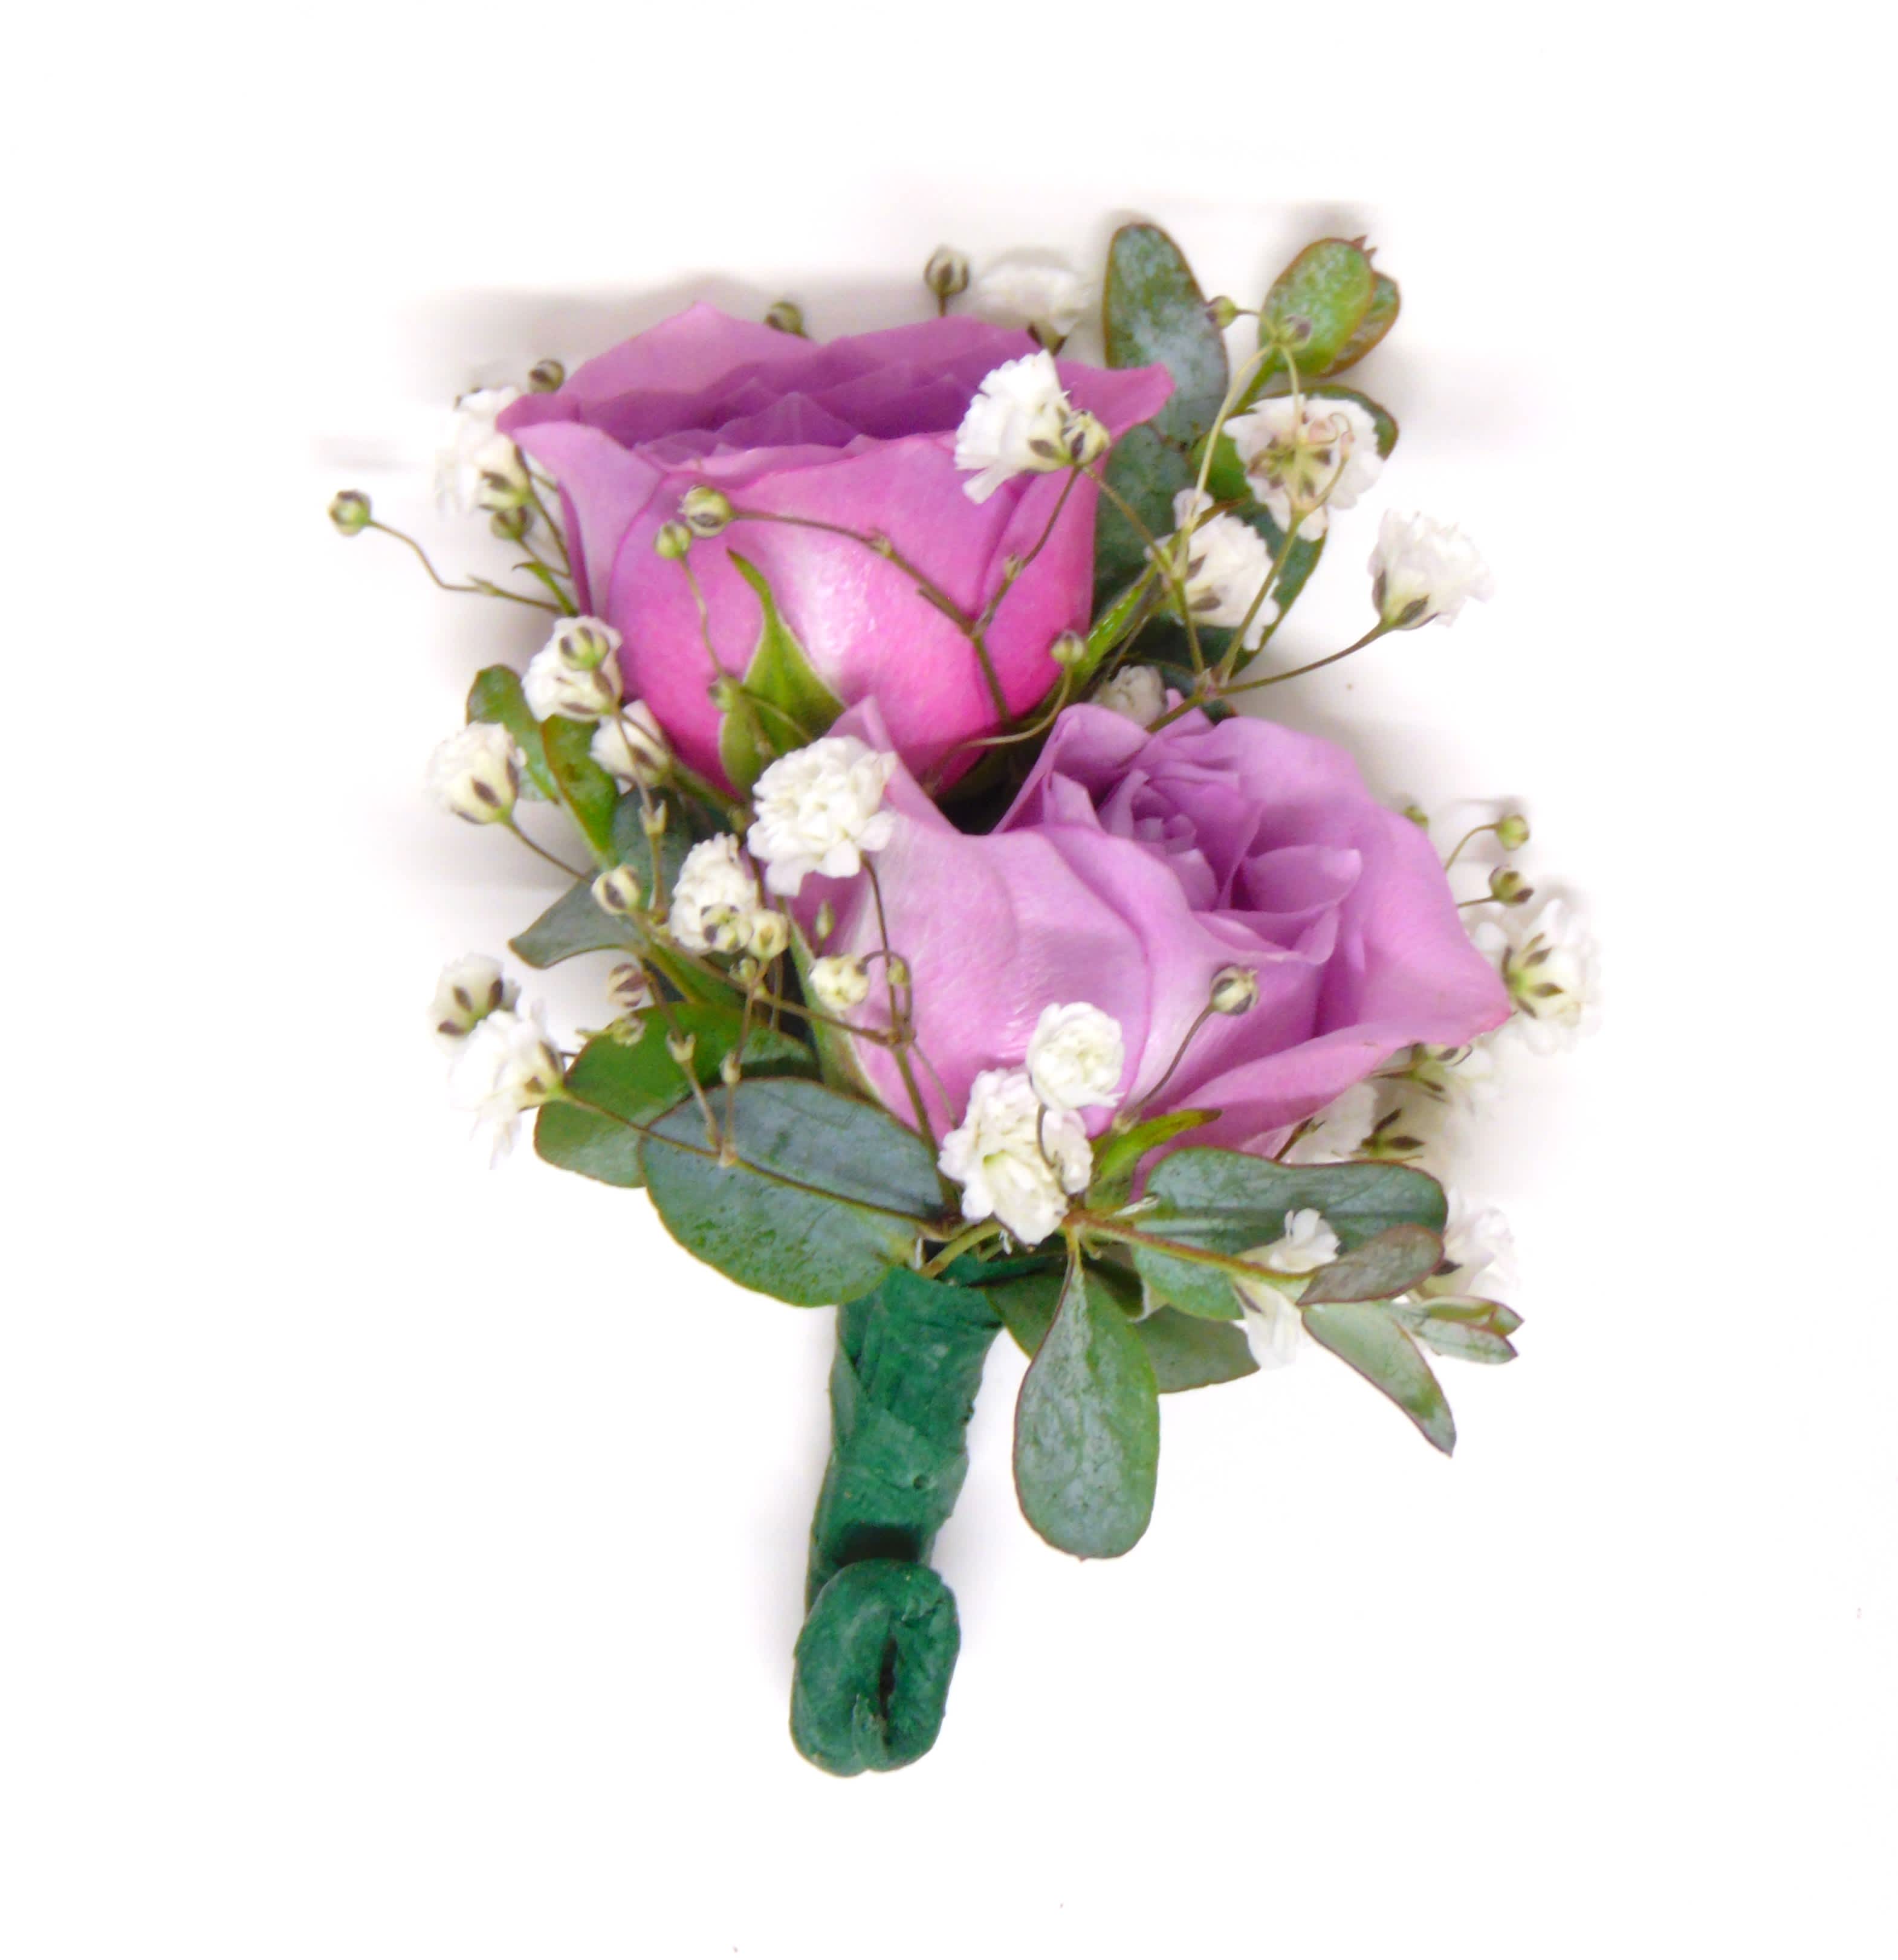 Two Lavender Spray Rose Boutonnniere - Two lavender spray roses, baby's breath, mini eucalyptus greens and standard green stem wrap. Deluxe option adds bling. Displayed in a clear box.